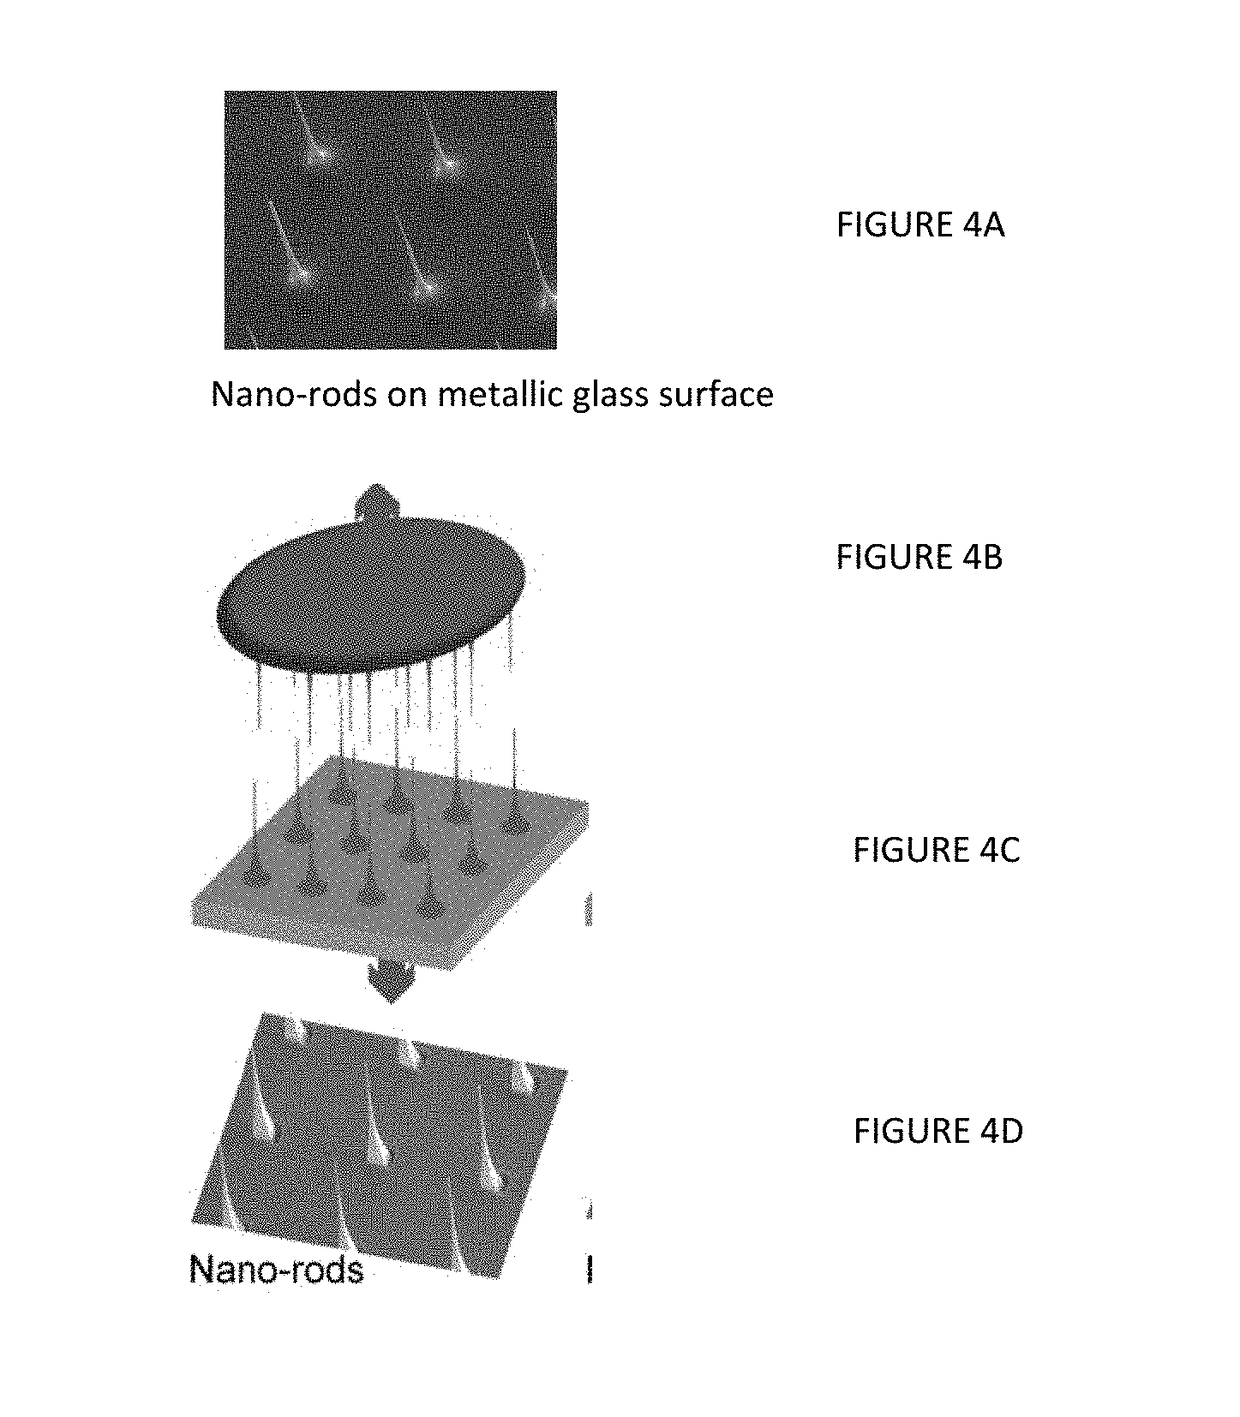 High-throughput fabrication of patterned surfaces and nanostructures by hot-pulling of metallic glass arrays